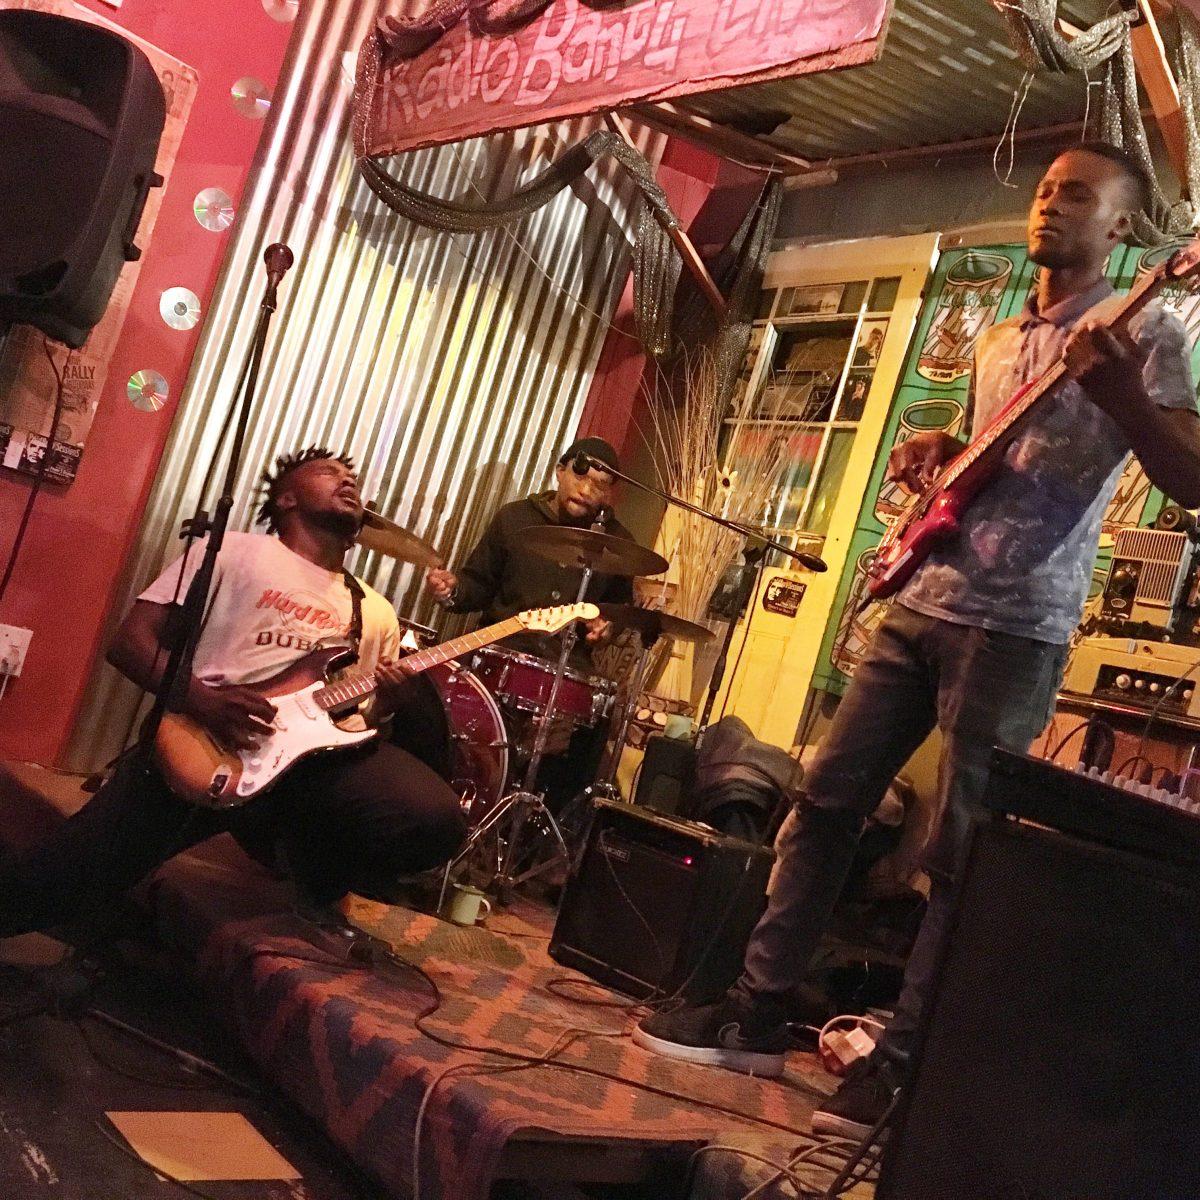 Shameless, a three-person rock 'n' roll band from Soweto, played for the first time last month at The Roving Bantu Kitchen in Johannesburg. PHOTO: The Hawk 